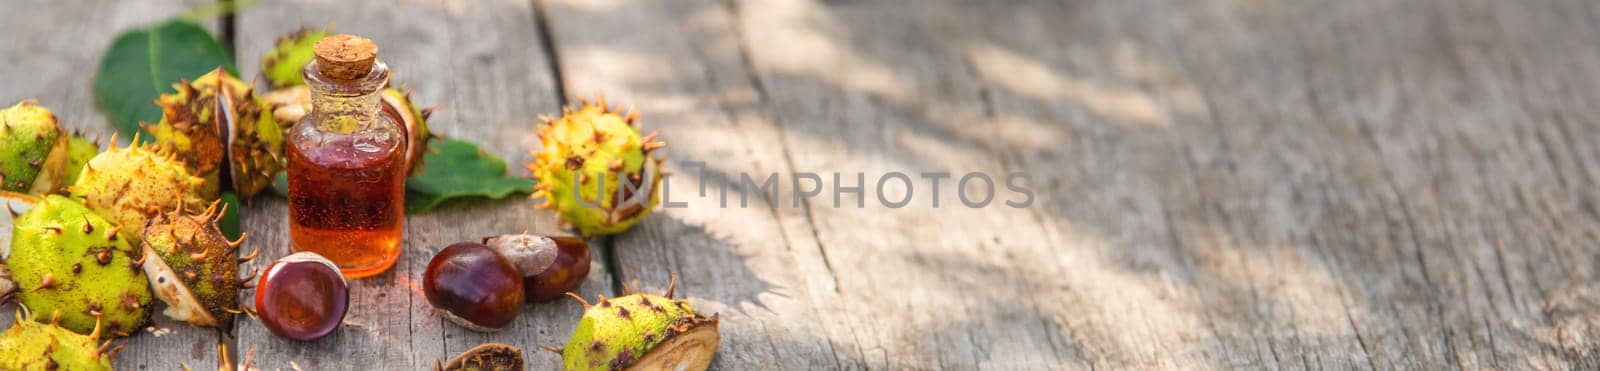 Horse chestnut extract in a bottle. selective focus. by yanadjana